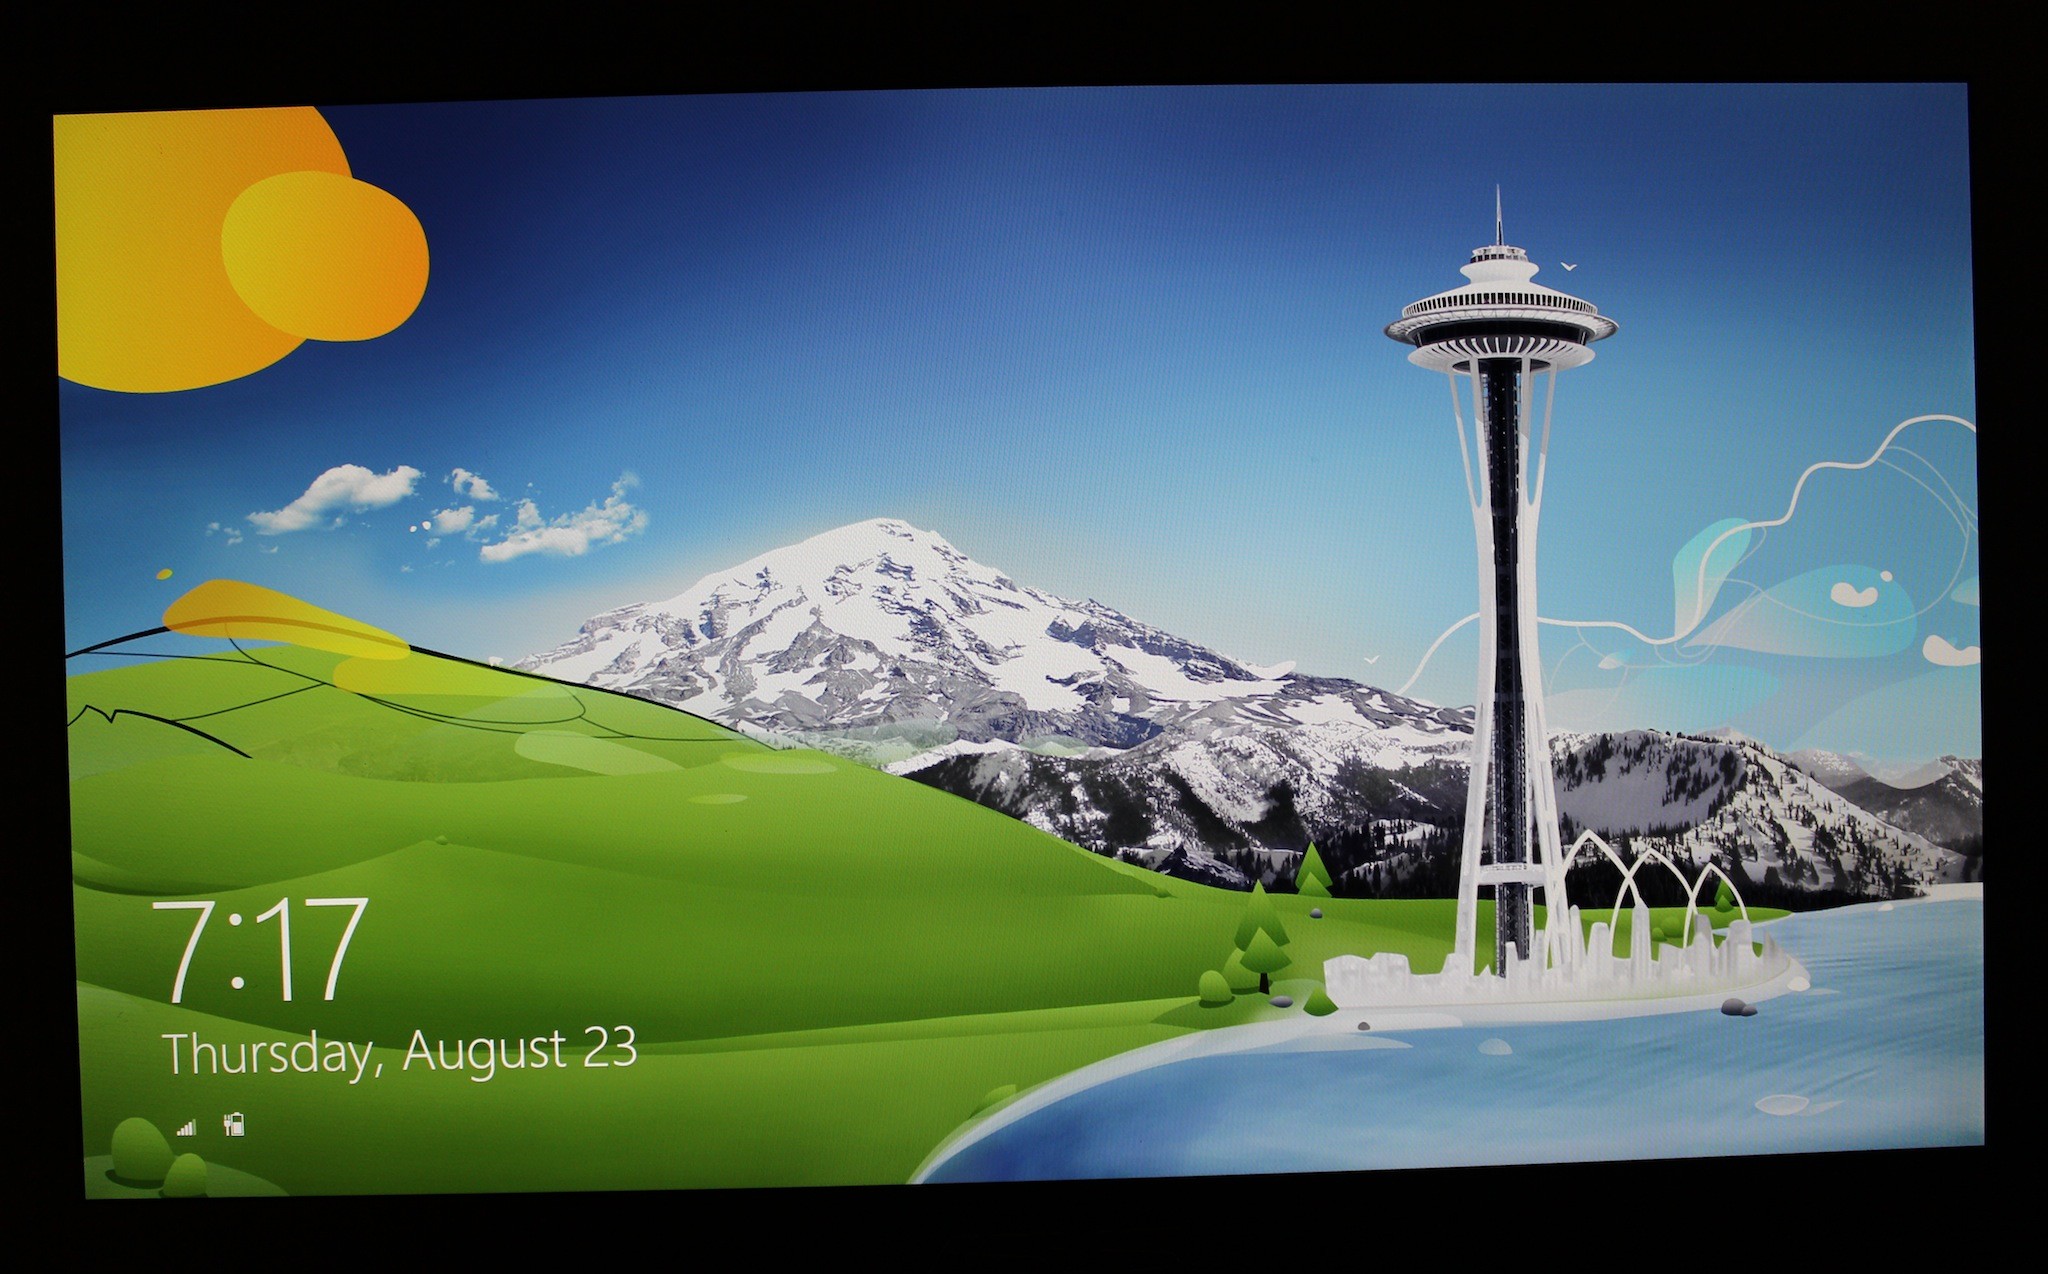 2048x1274 on, using one of the colorful login screen wallpapers from Windows 8 .